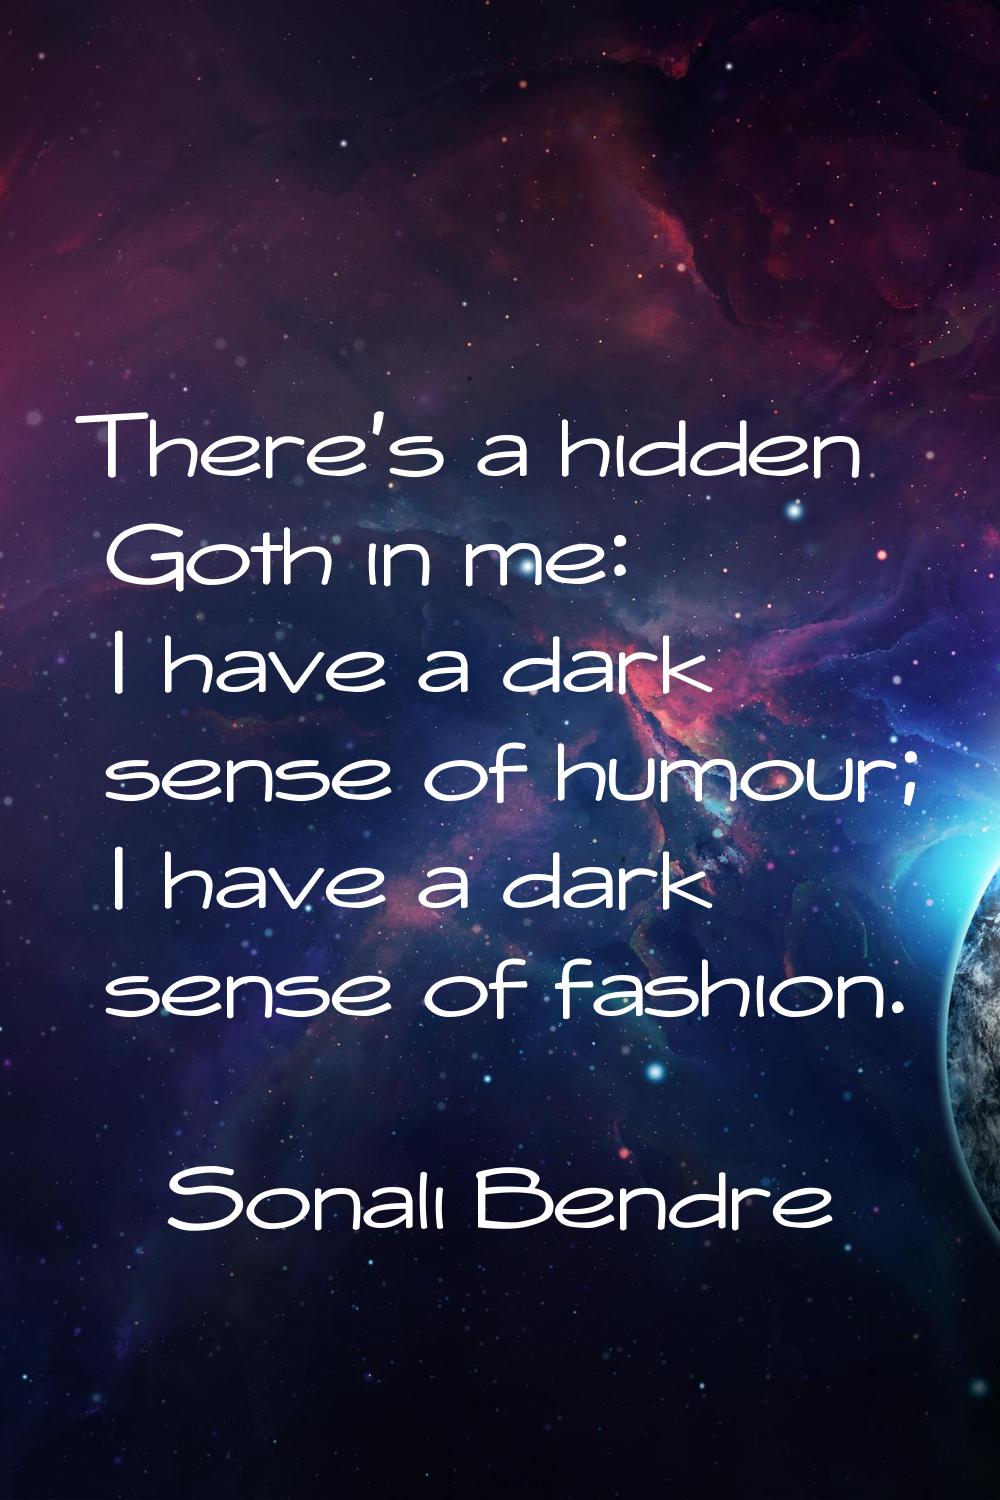 There's a hidden Goth in me: I have a dark sense of humour; I have a dark sense of fashion.